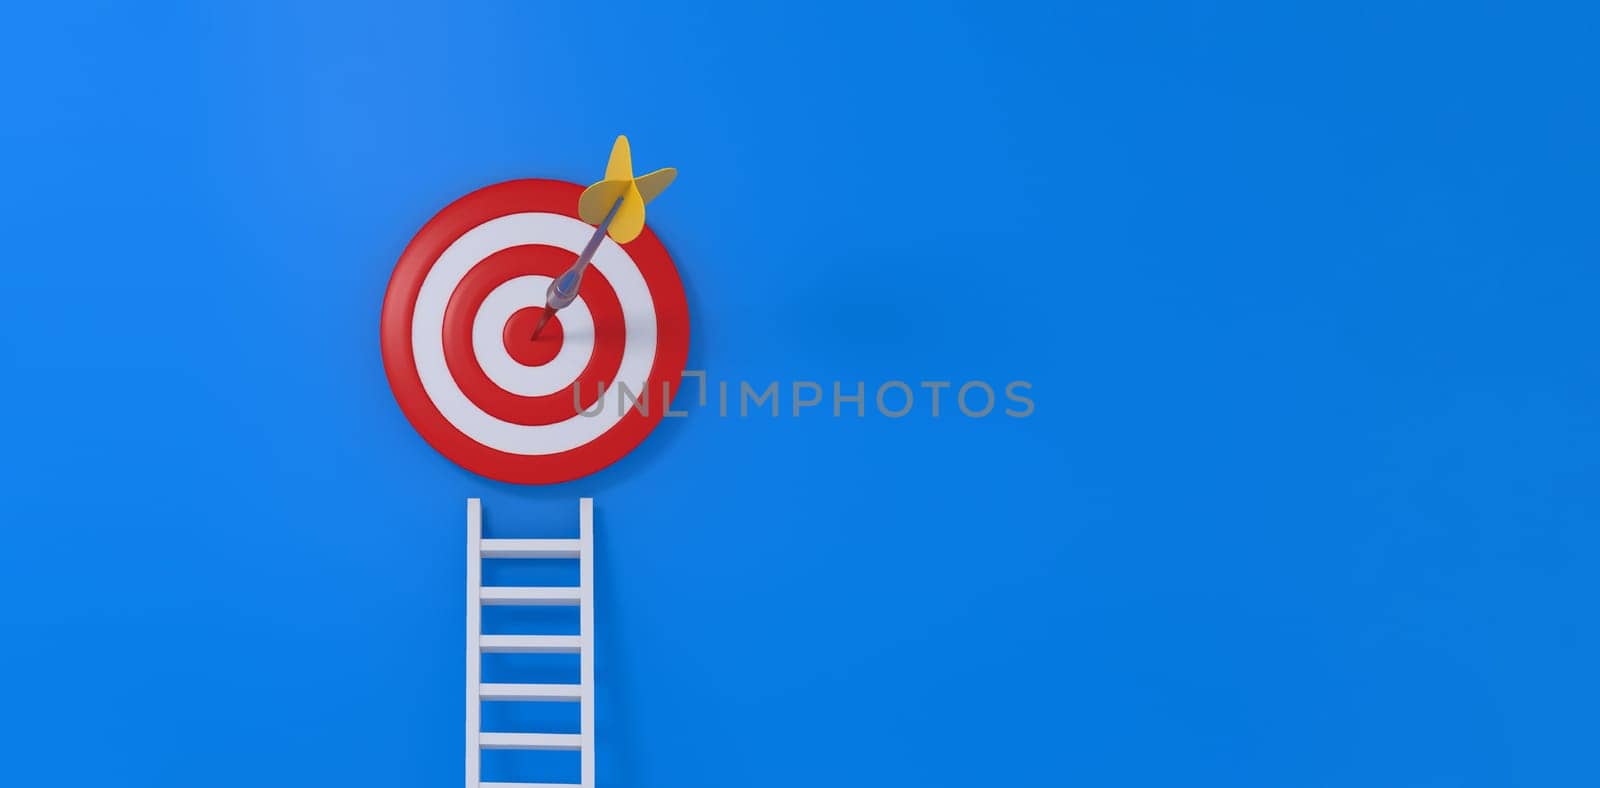 Ladder glowing and aiming high on blue background. 3D rendering.